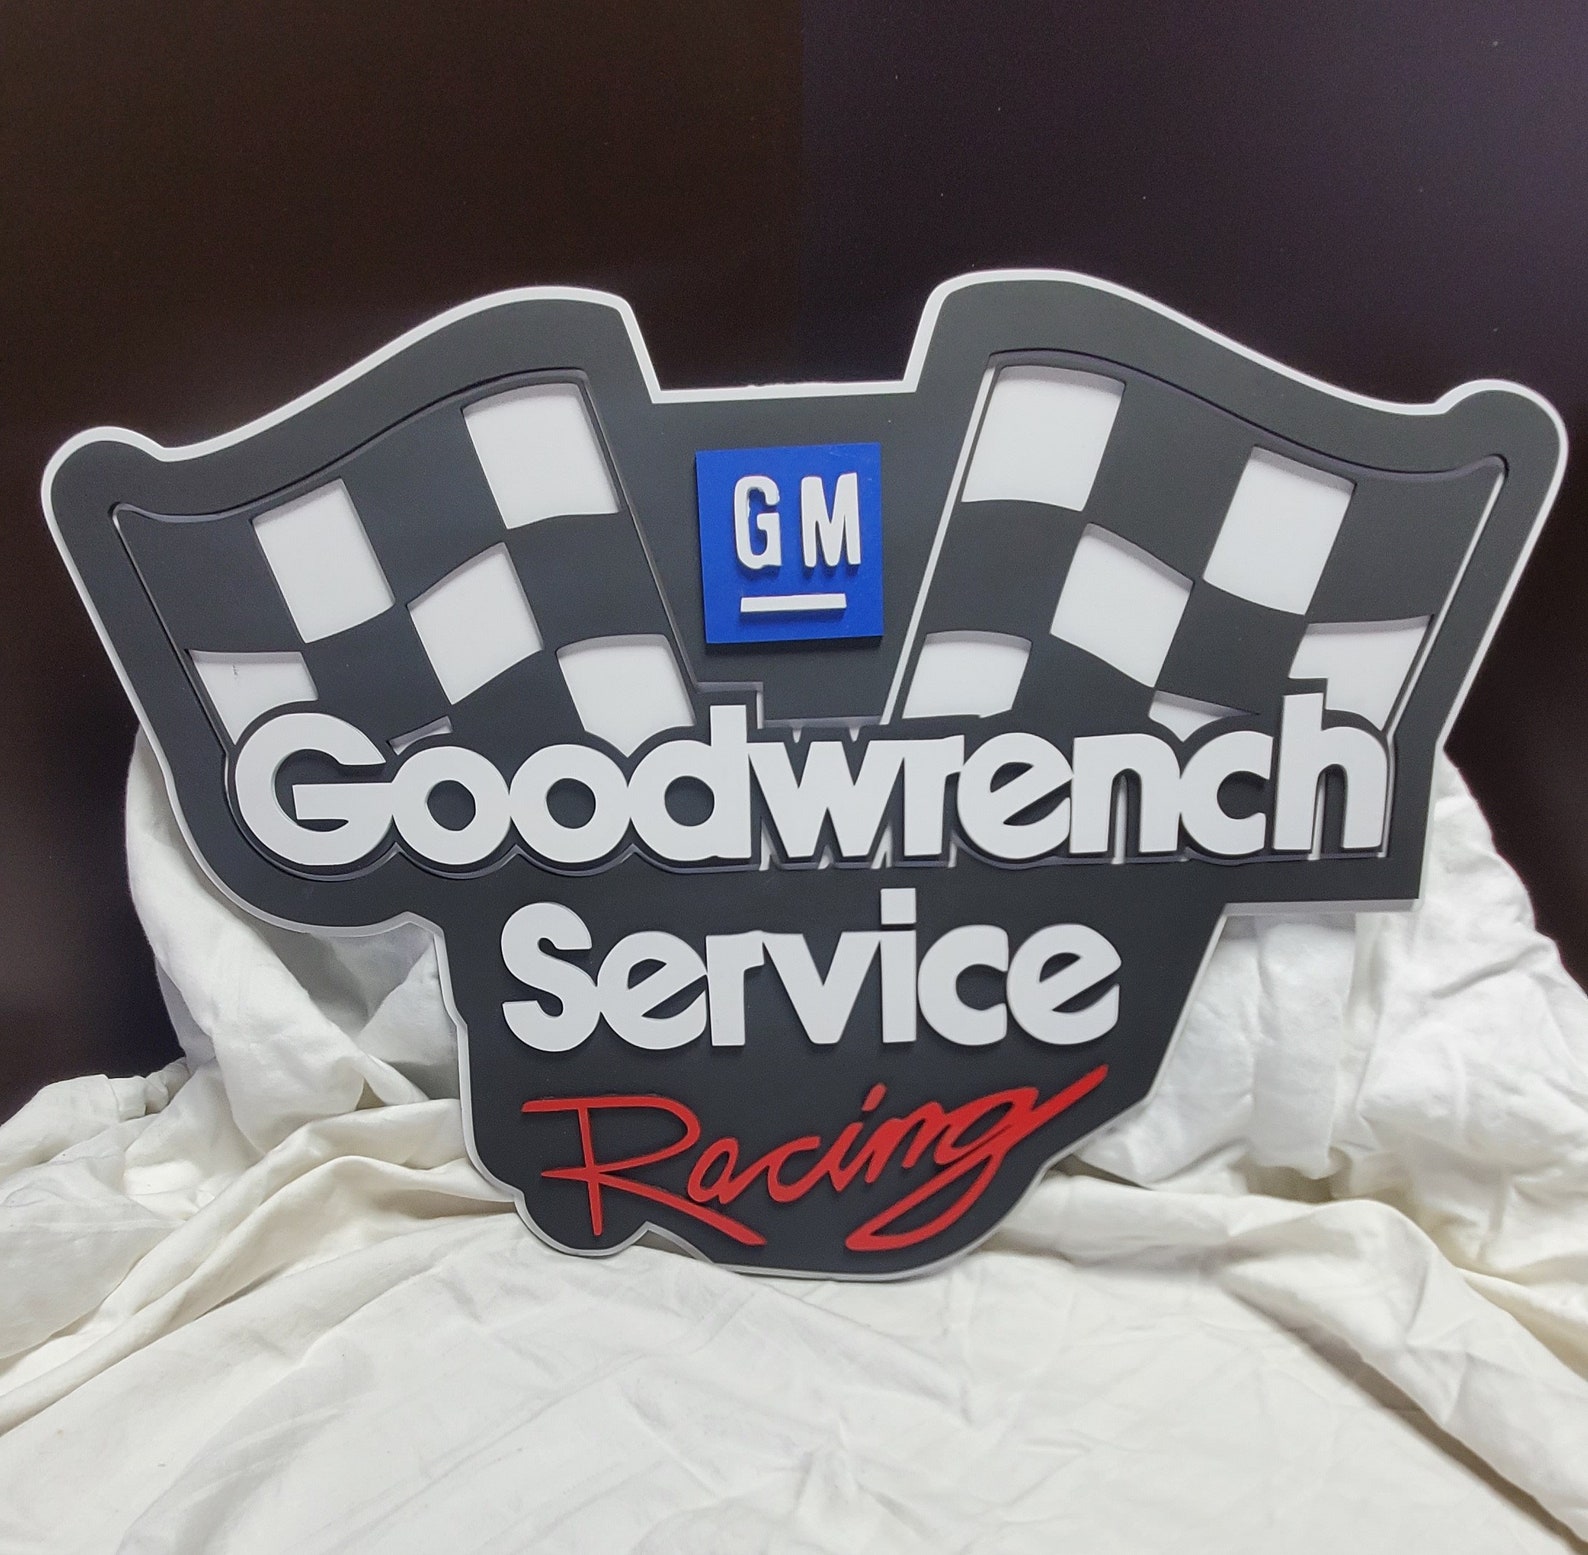 GM Goodwrench Racing Wooden Handmaded wall art wall sign | Etsy